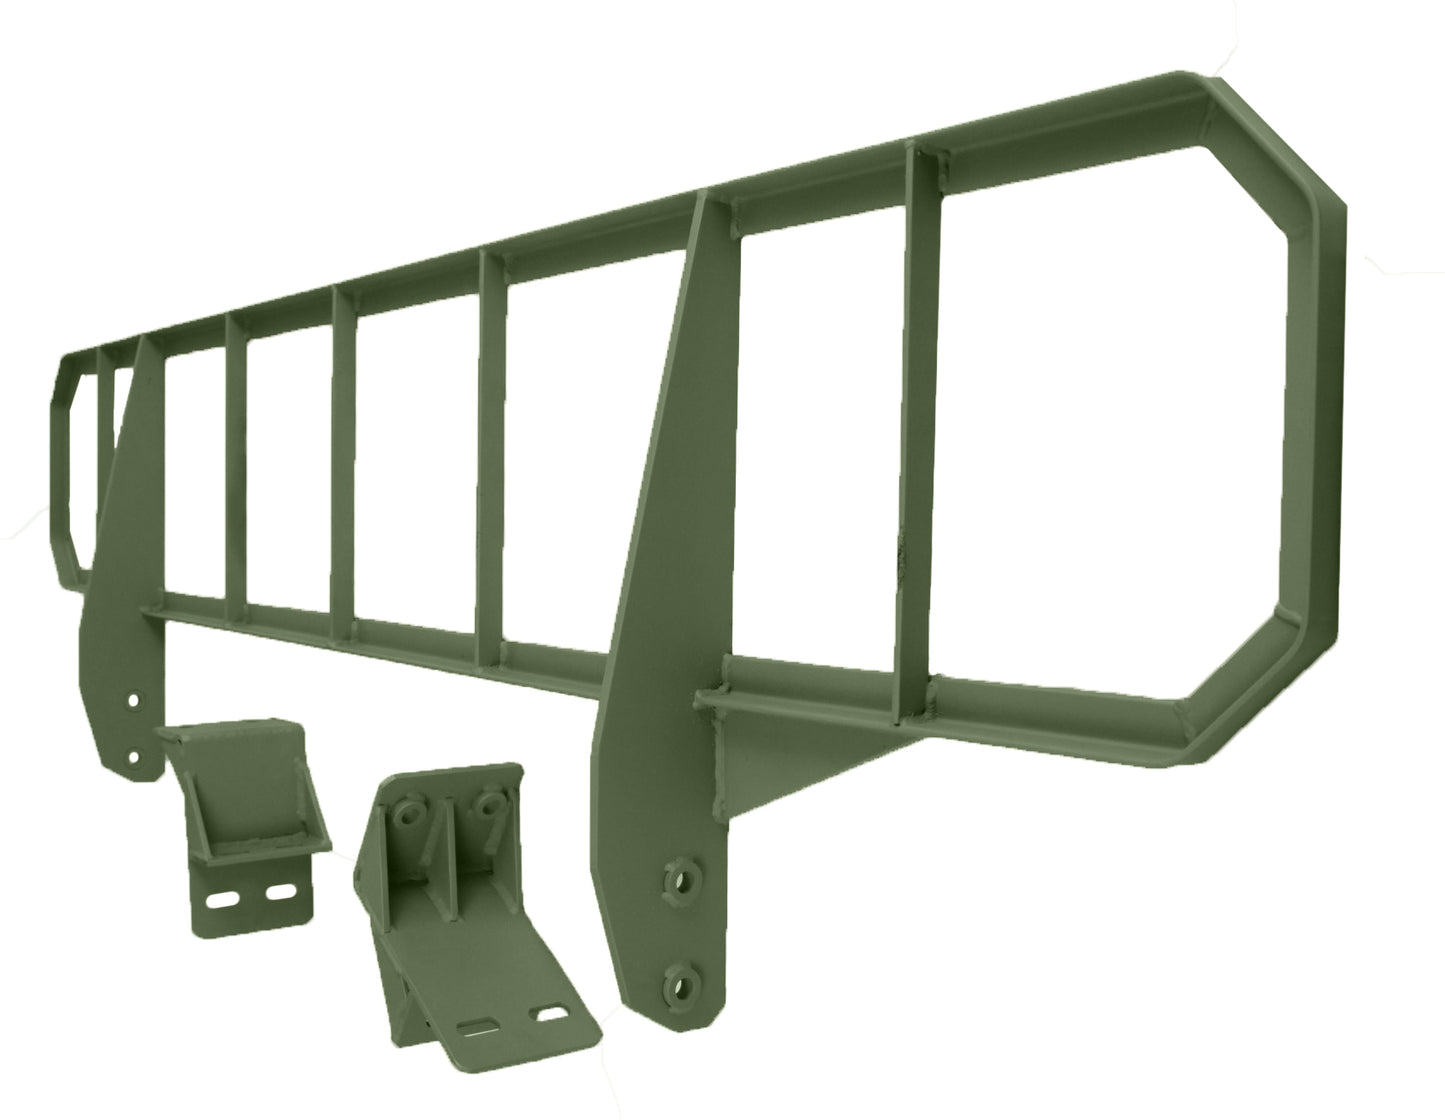 Standard Duty Brush Guard for Military Humvee Plus Mounting Brackets No Hardware